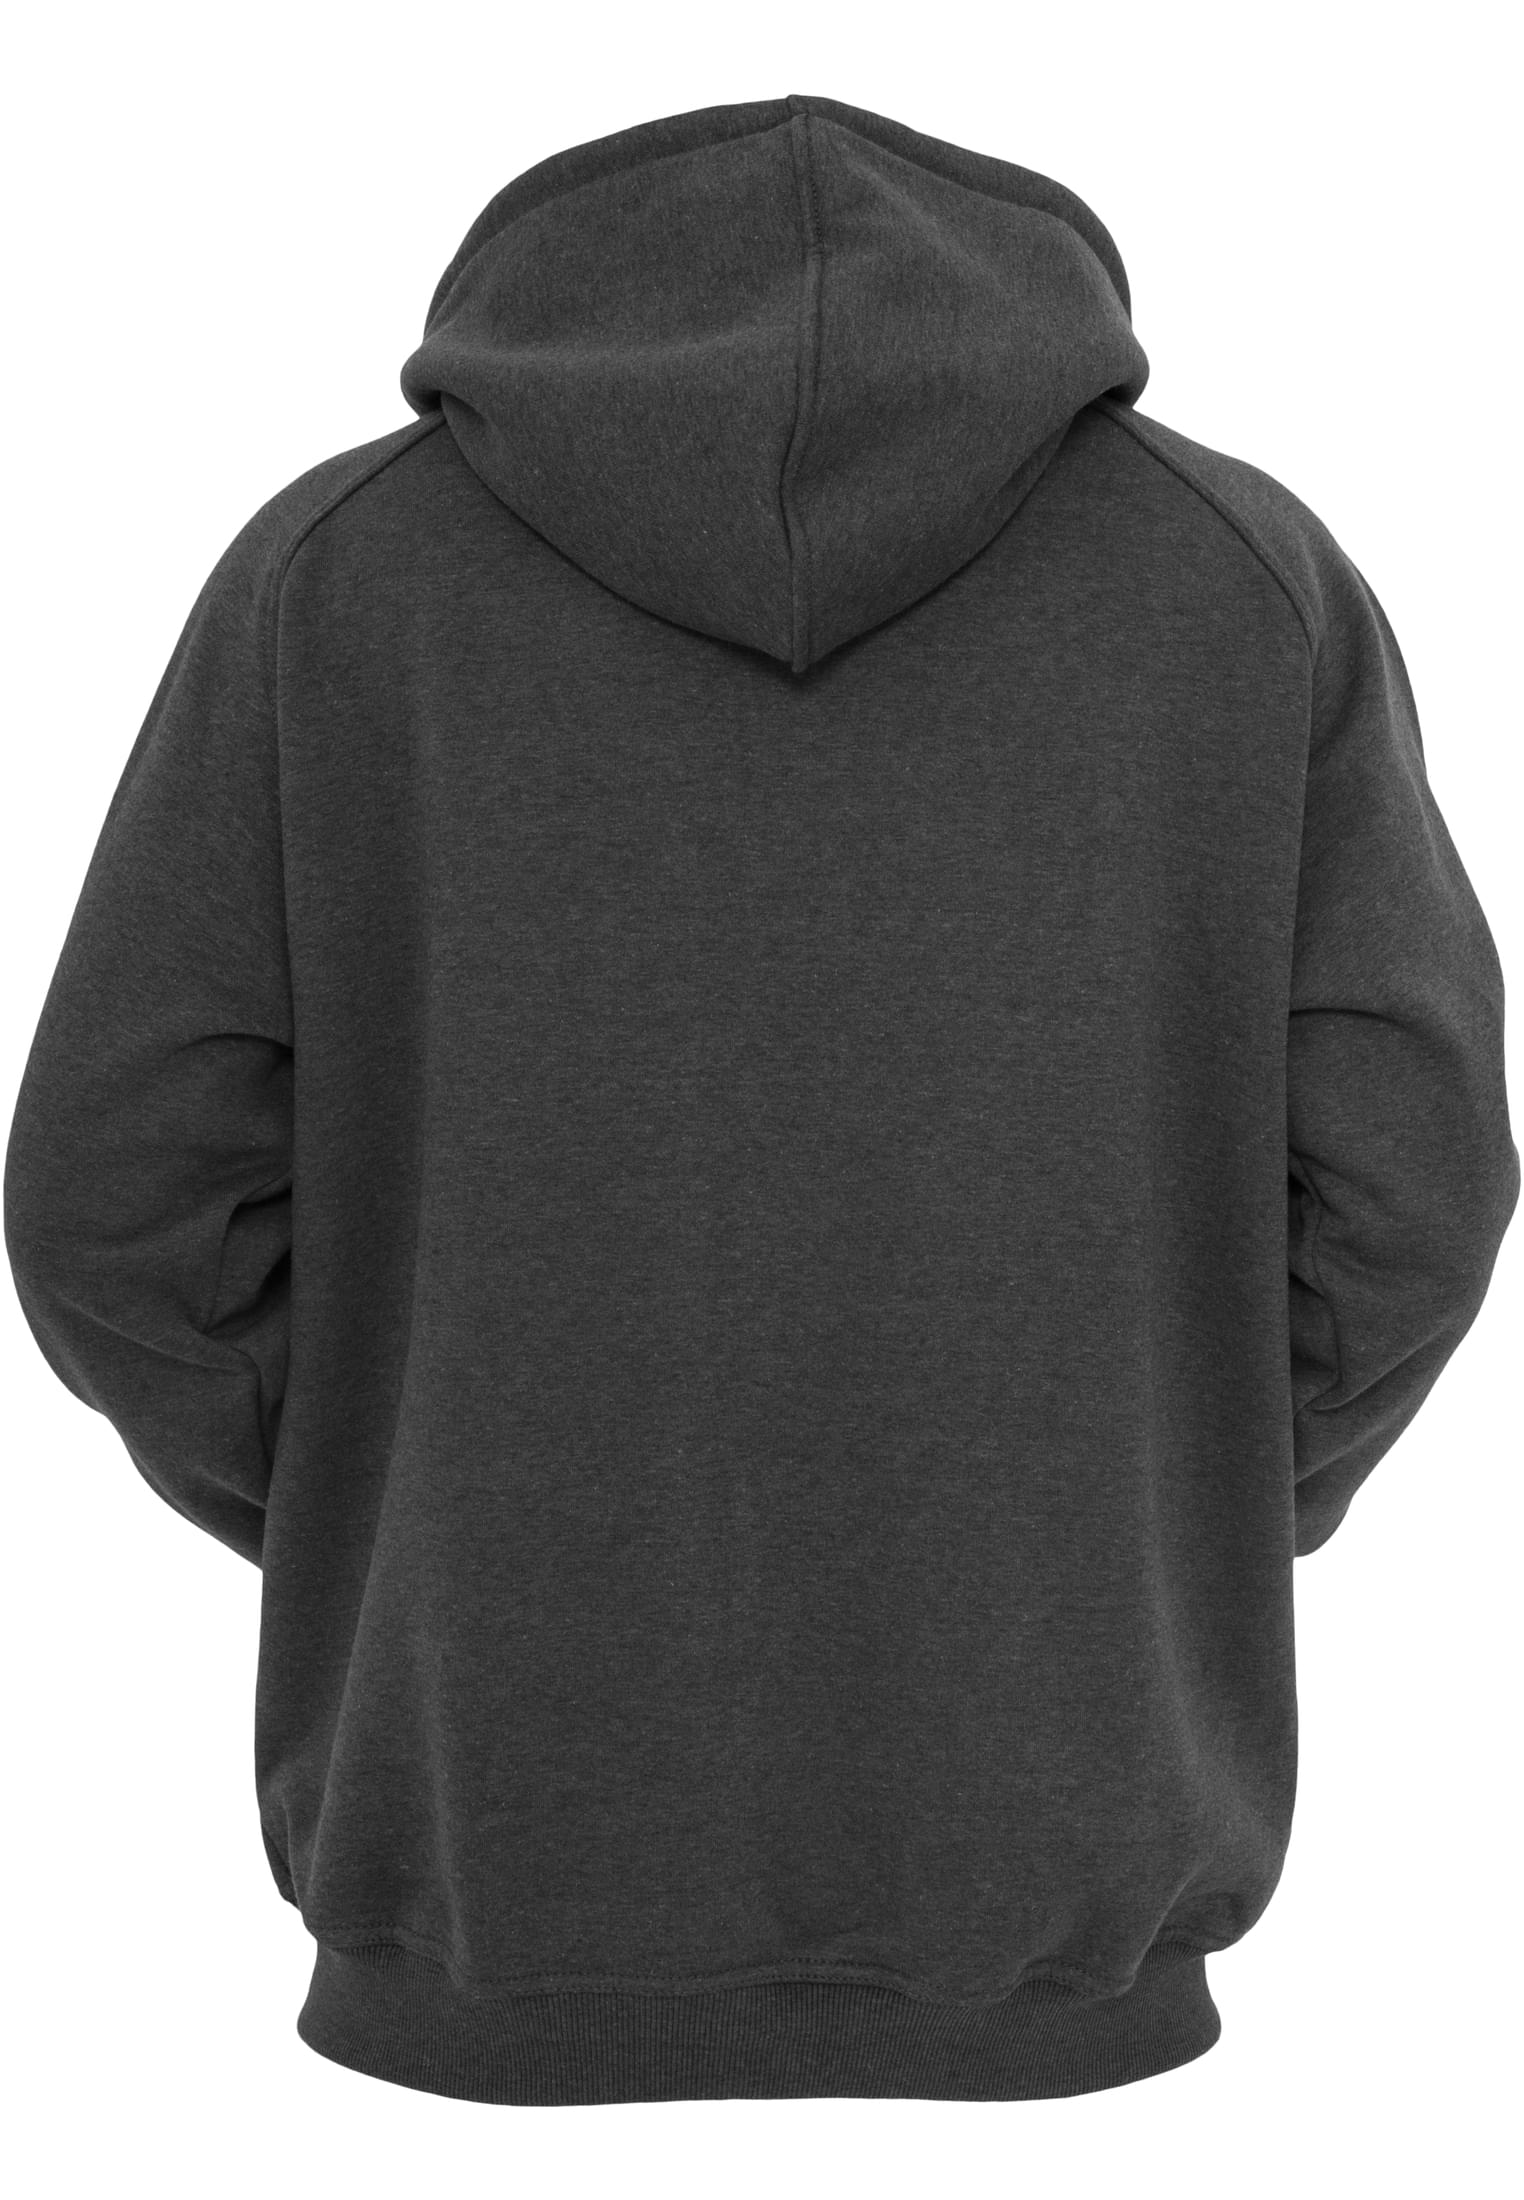 Plus Size Blank Hoody in Farbe charcoal